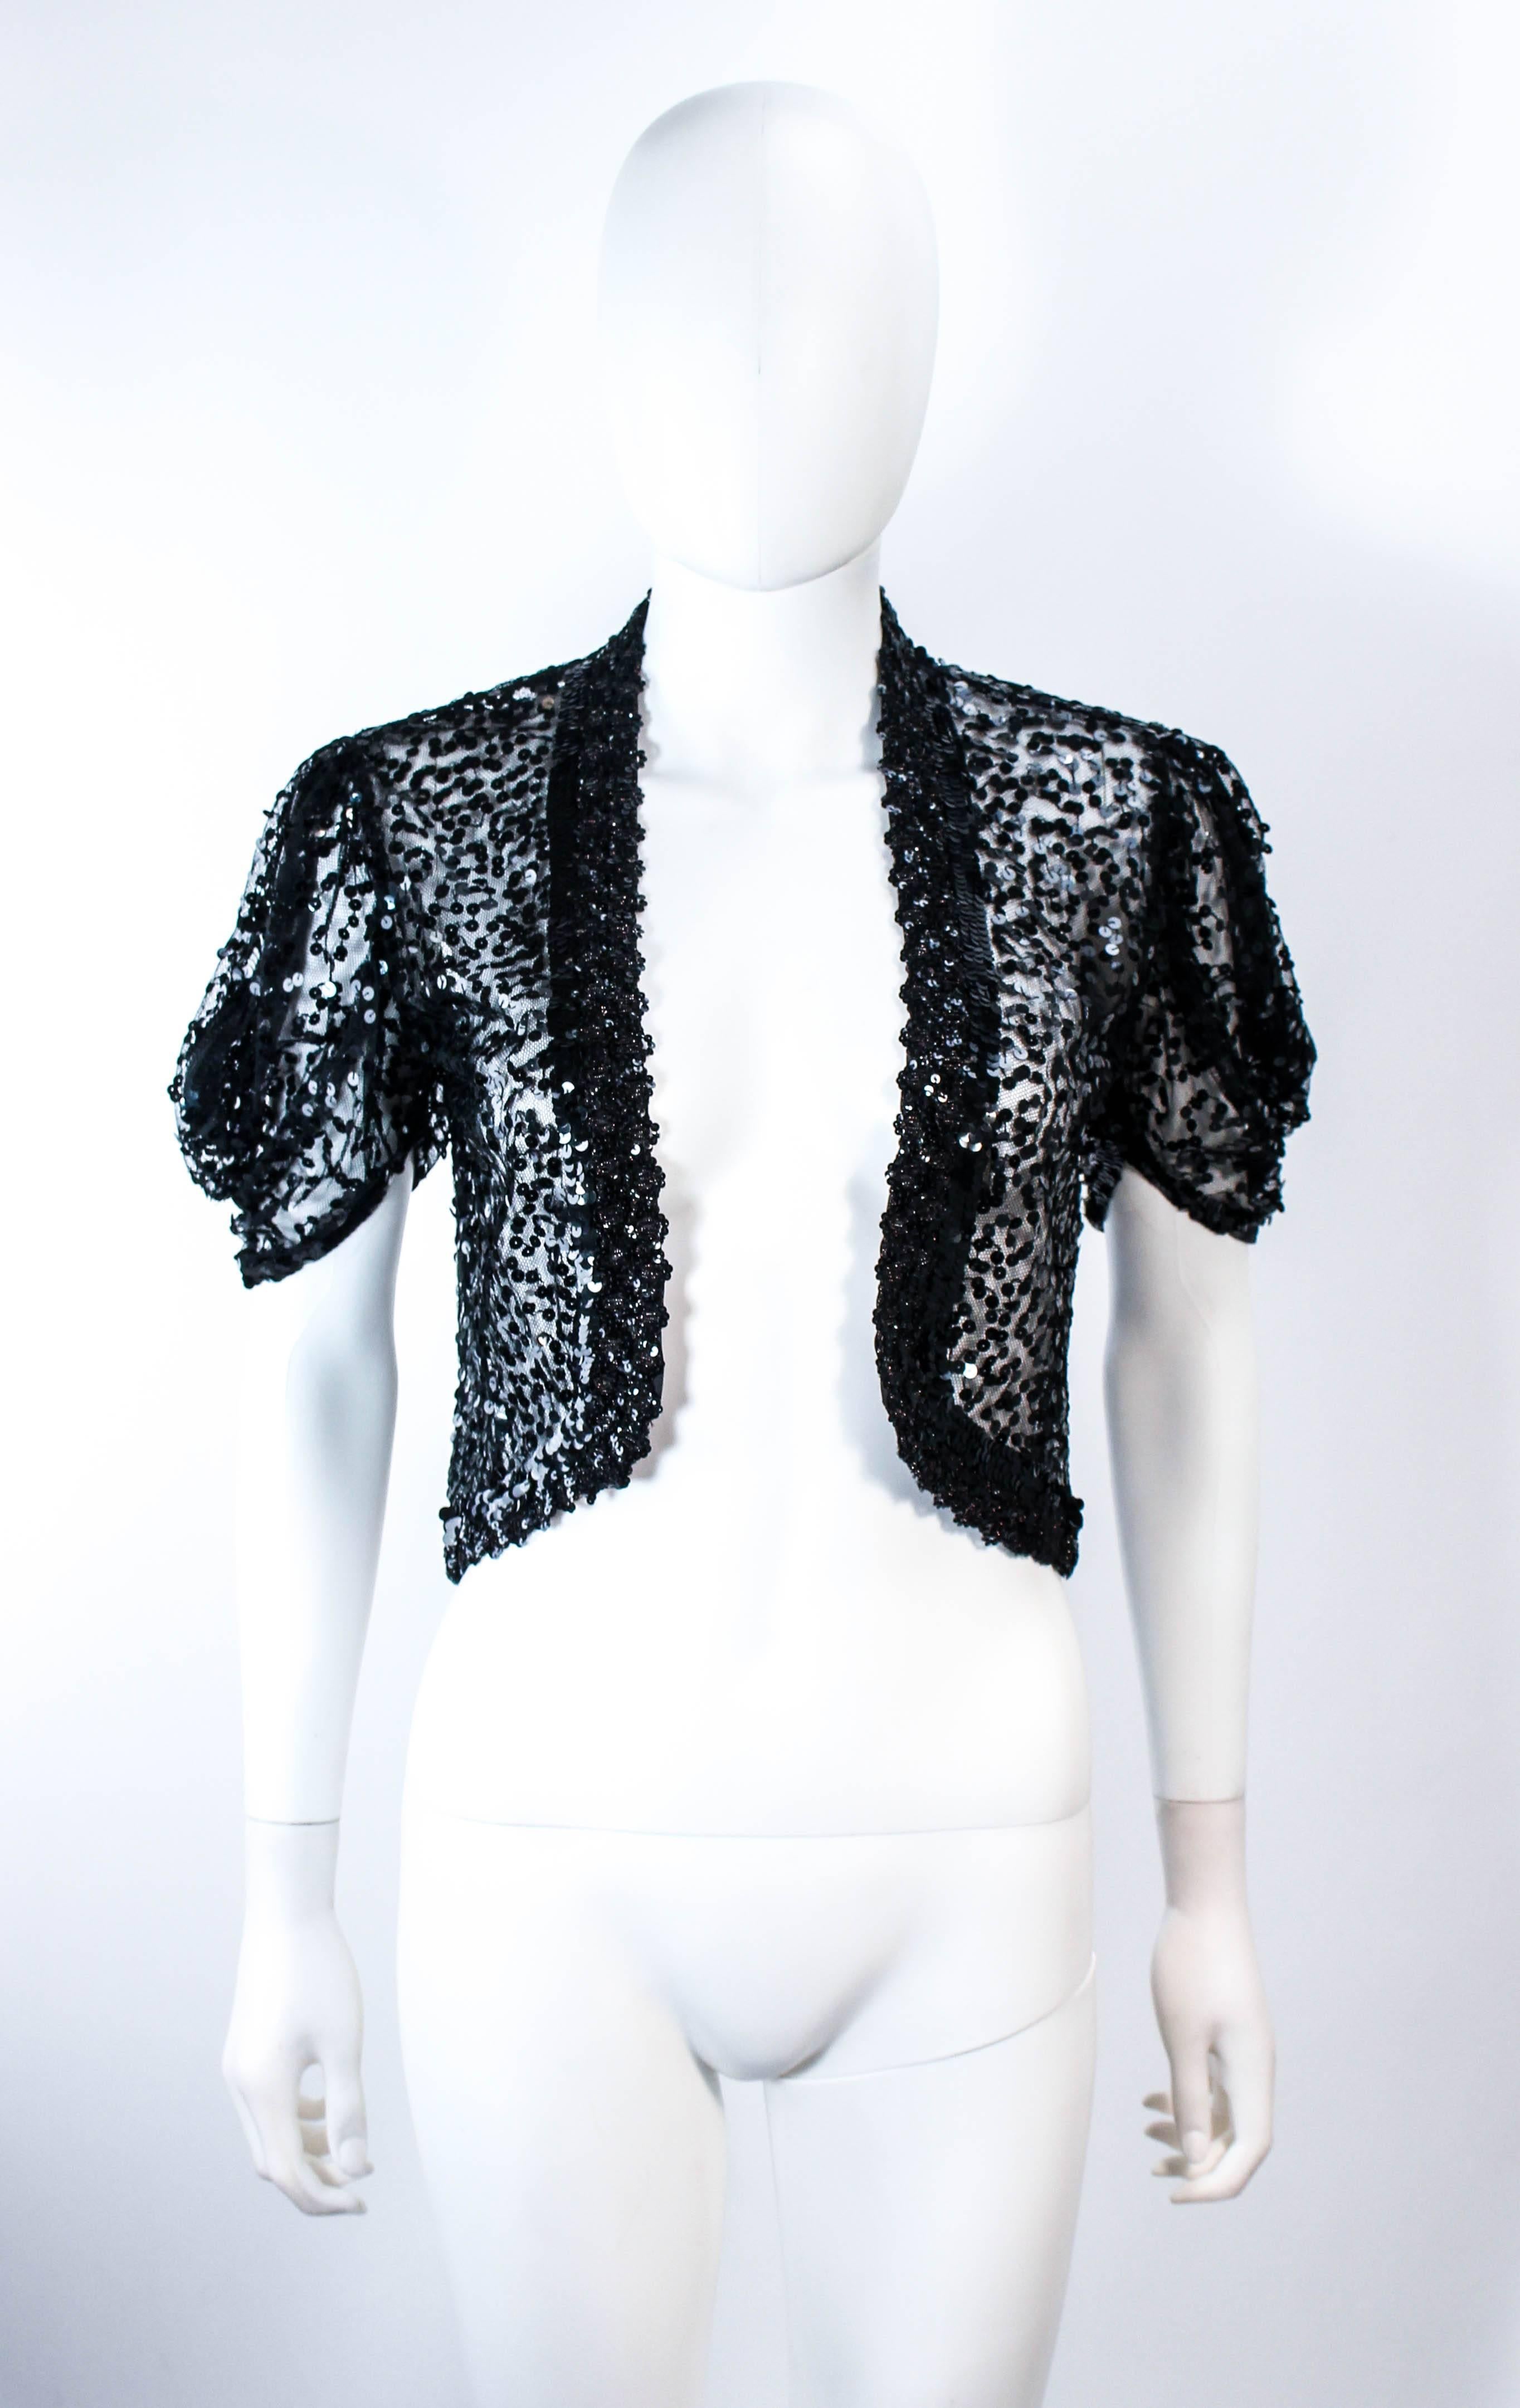 This antique jacket is composed of a sheer black mesh with black sequin applique. The sleeves have a functional zipper. Features an open style. In excellent vintage condition. 

**Please cross-reference measurements for personal accuracy. Size in